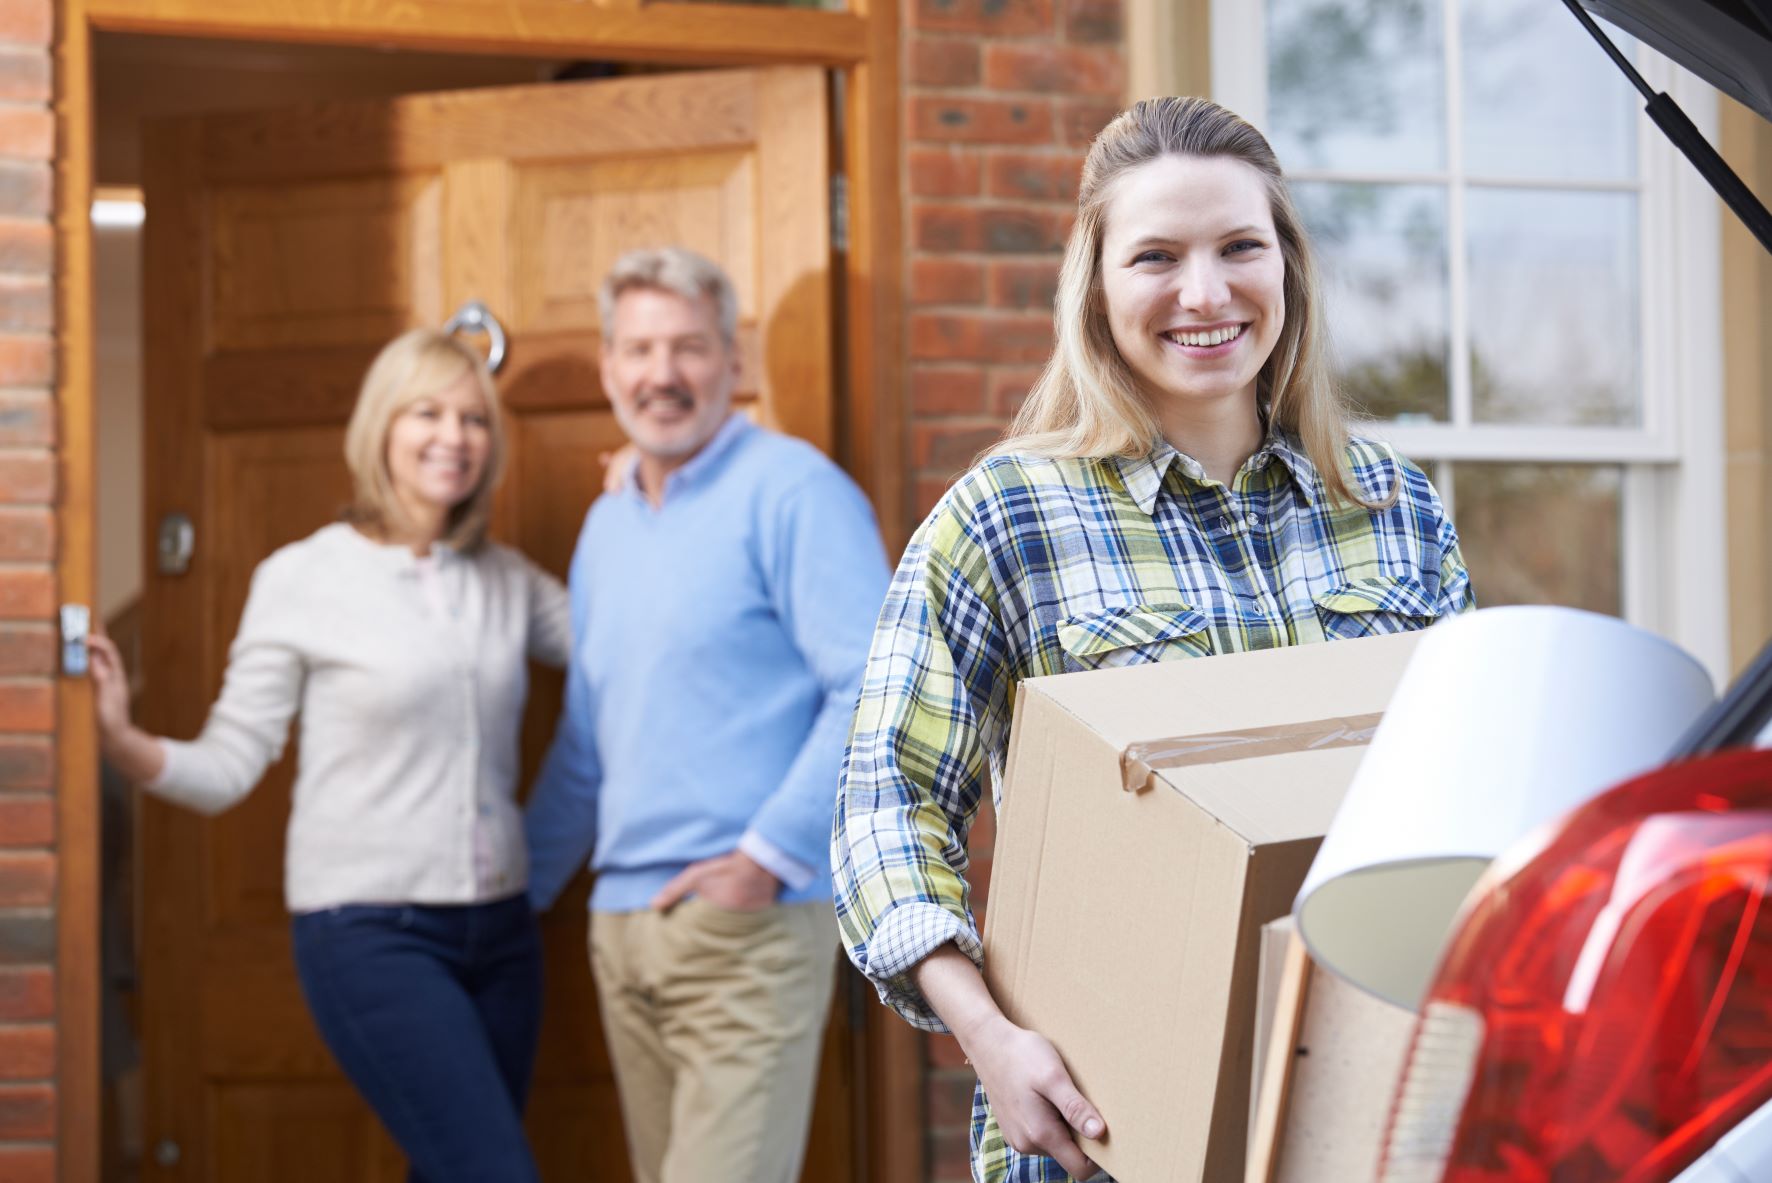 Moving Tips for College Students